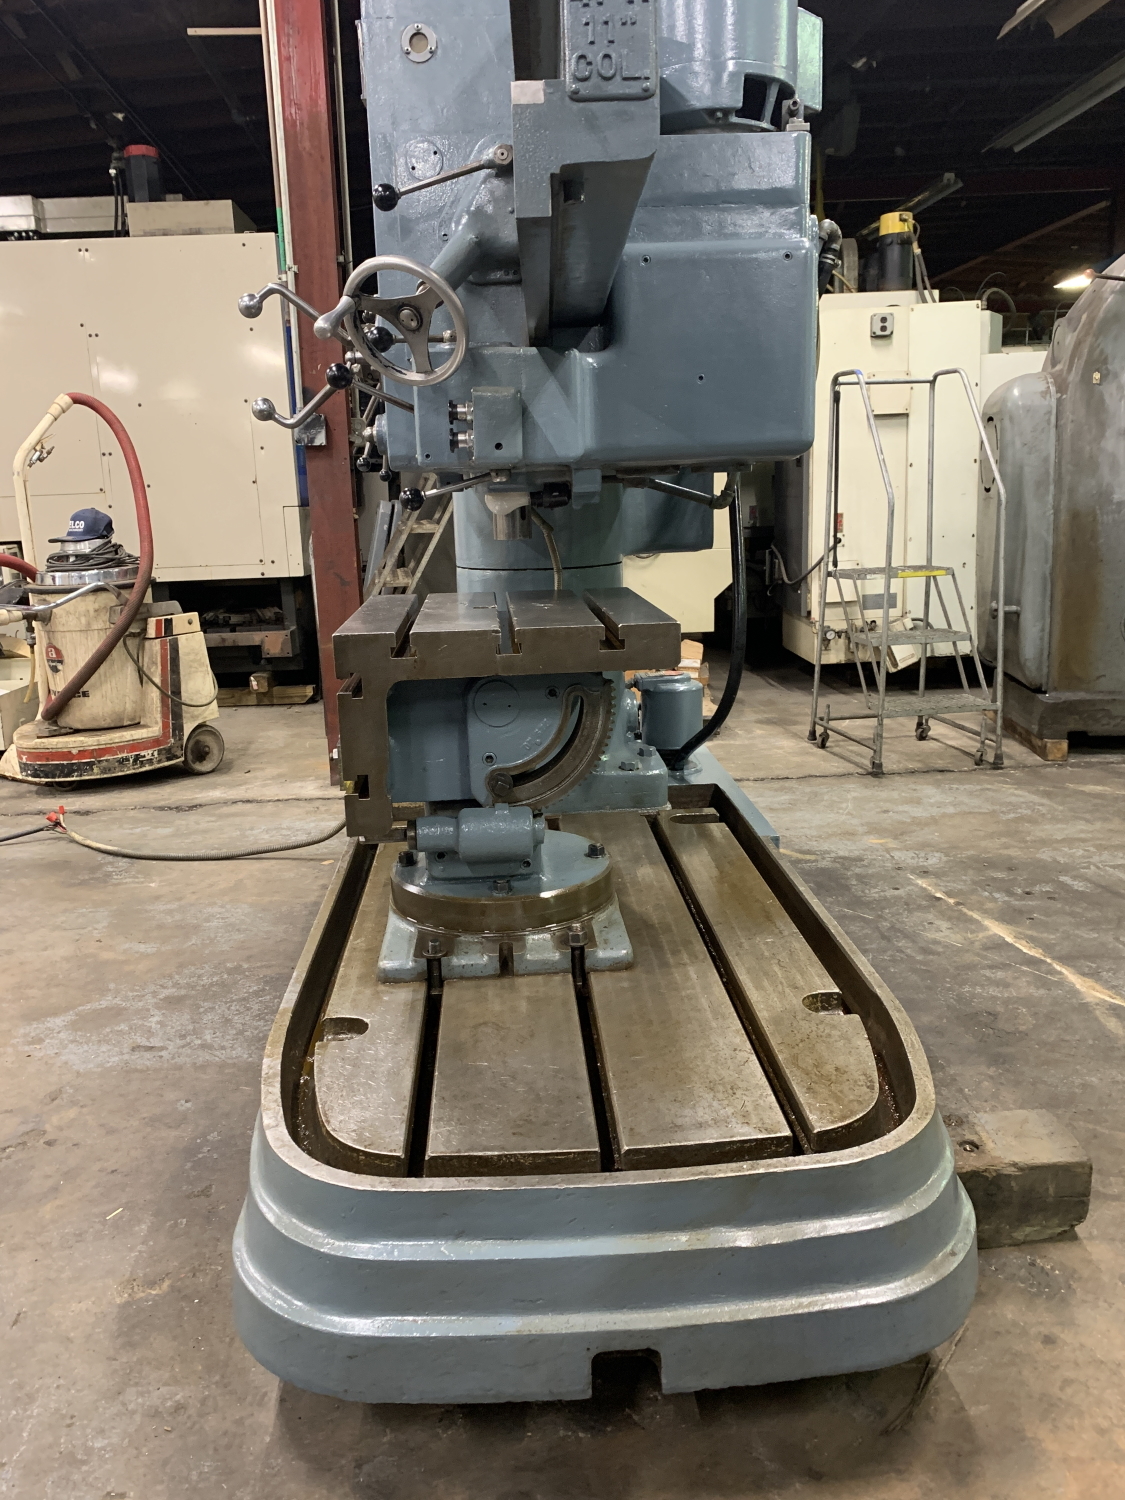 1965 AMERICAN TOOL WORKS 4' Radial Drill | RELCO MACHINERY